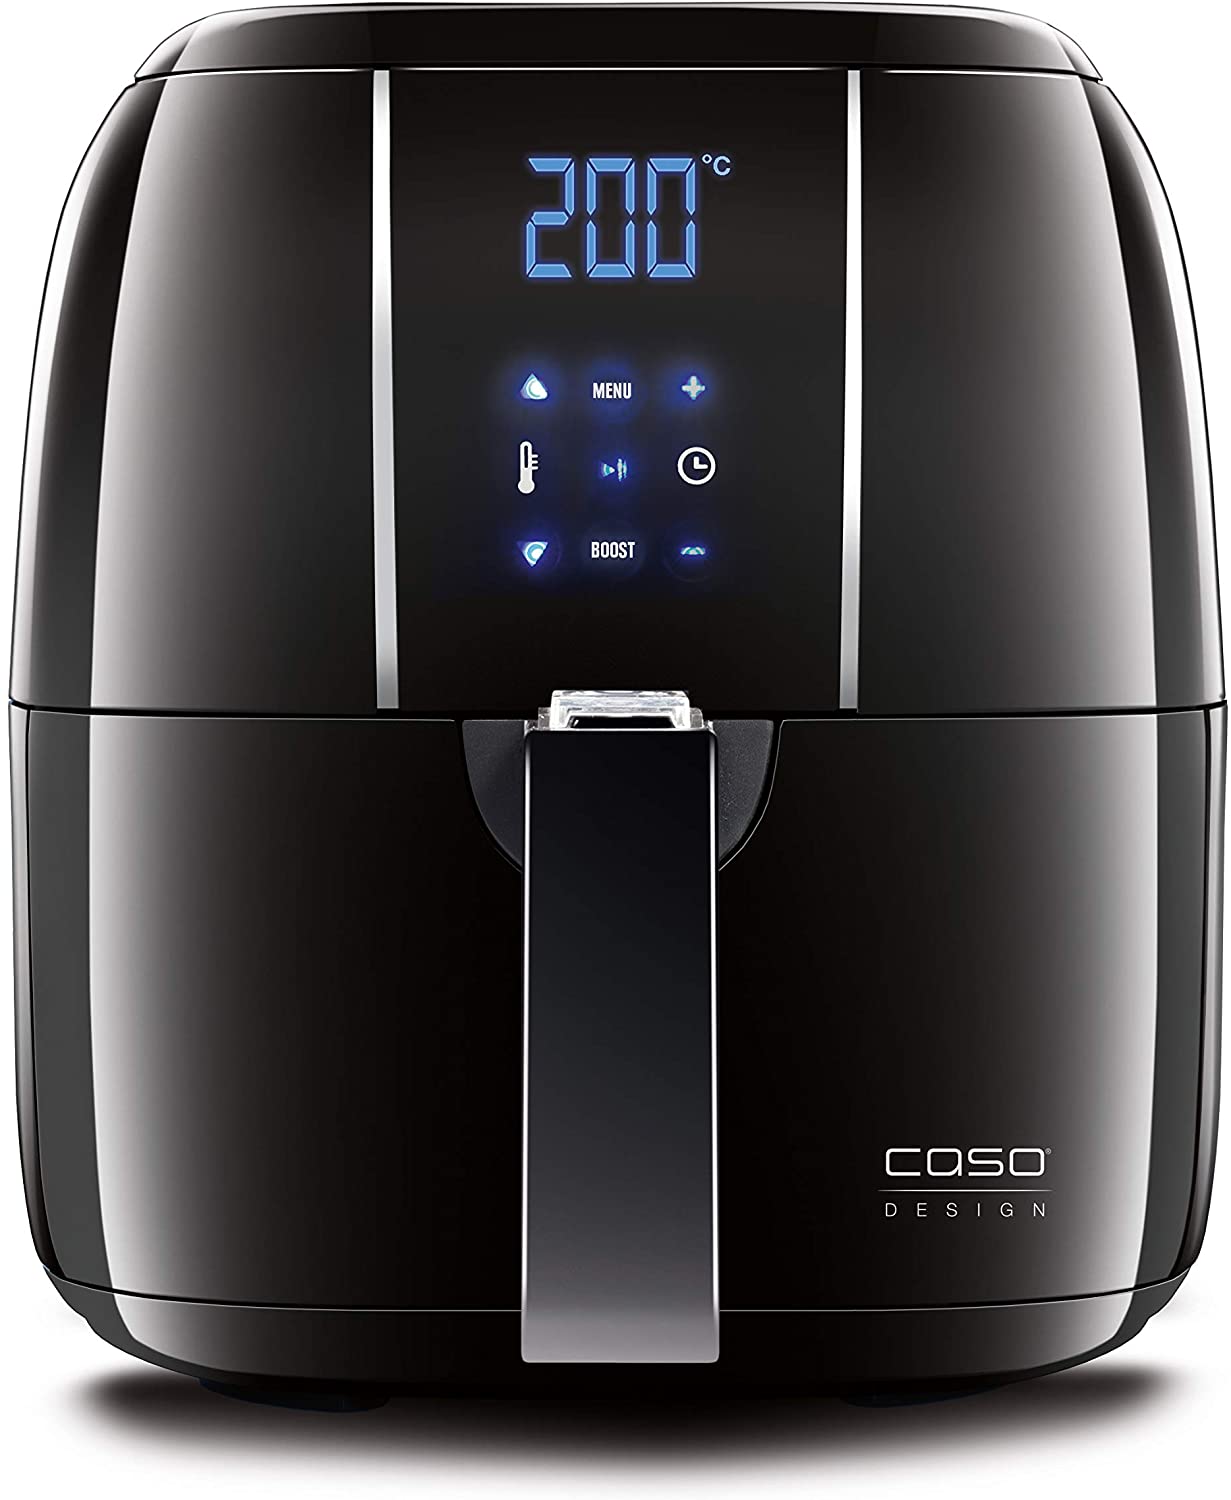 Caso | AF200 Hot Air Fryer 3L | 6 Programmes 60-200°C Healthier Fryer without Oil/Grease Stainless Steel Interior Easy to Clean Black